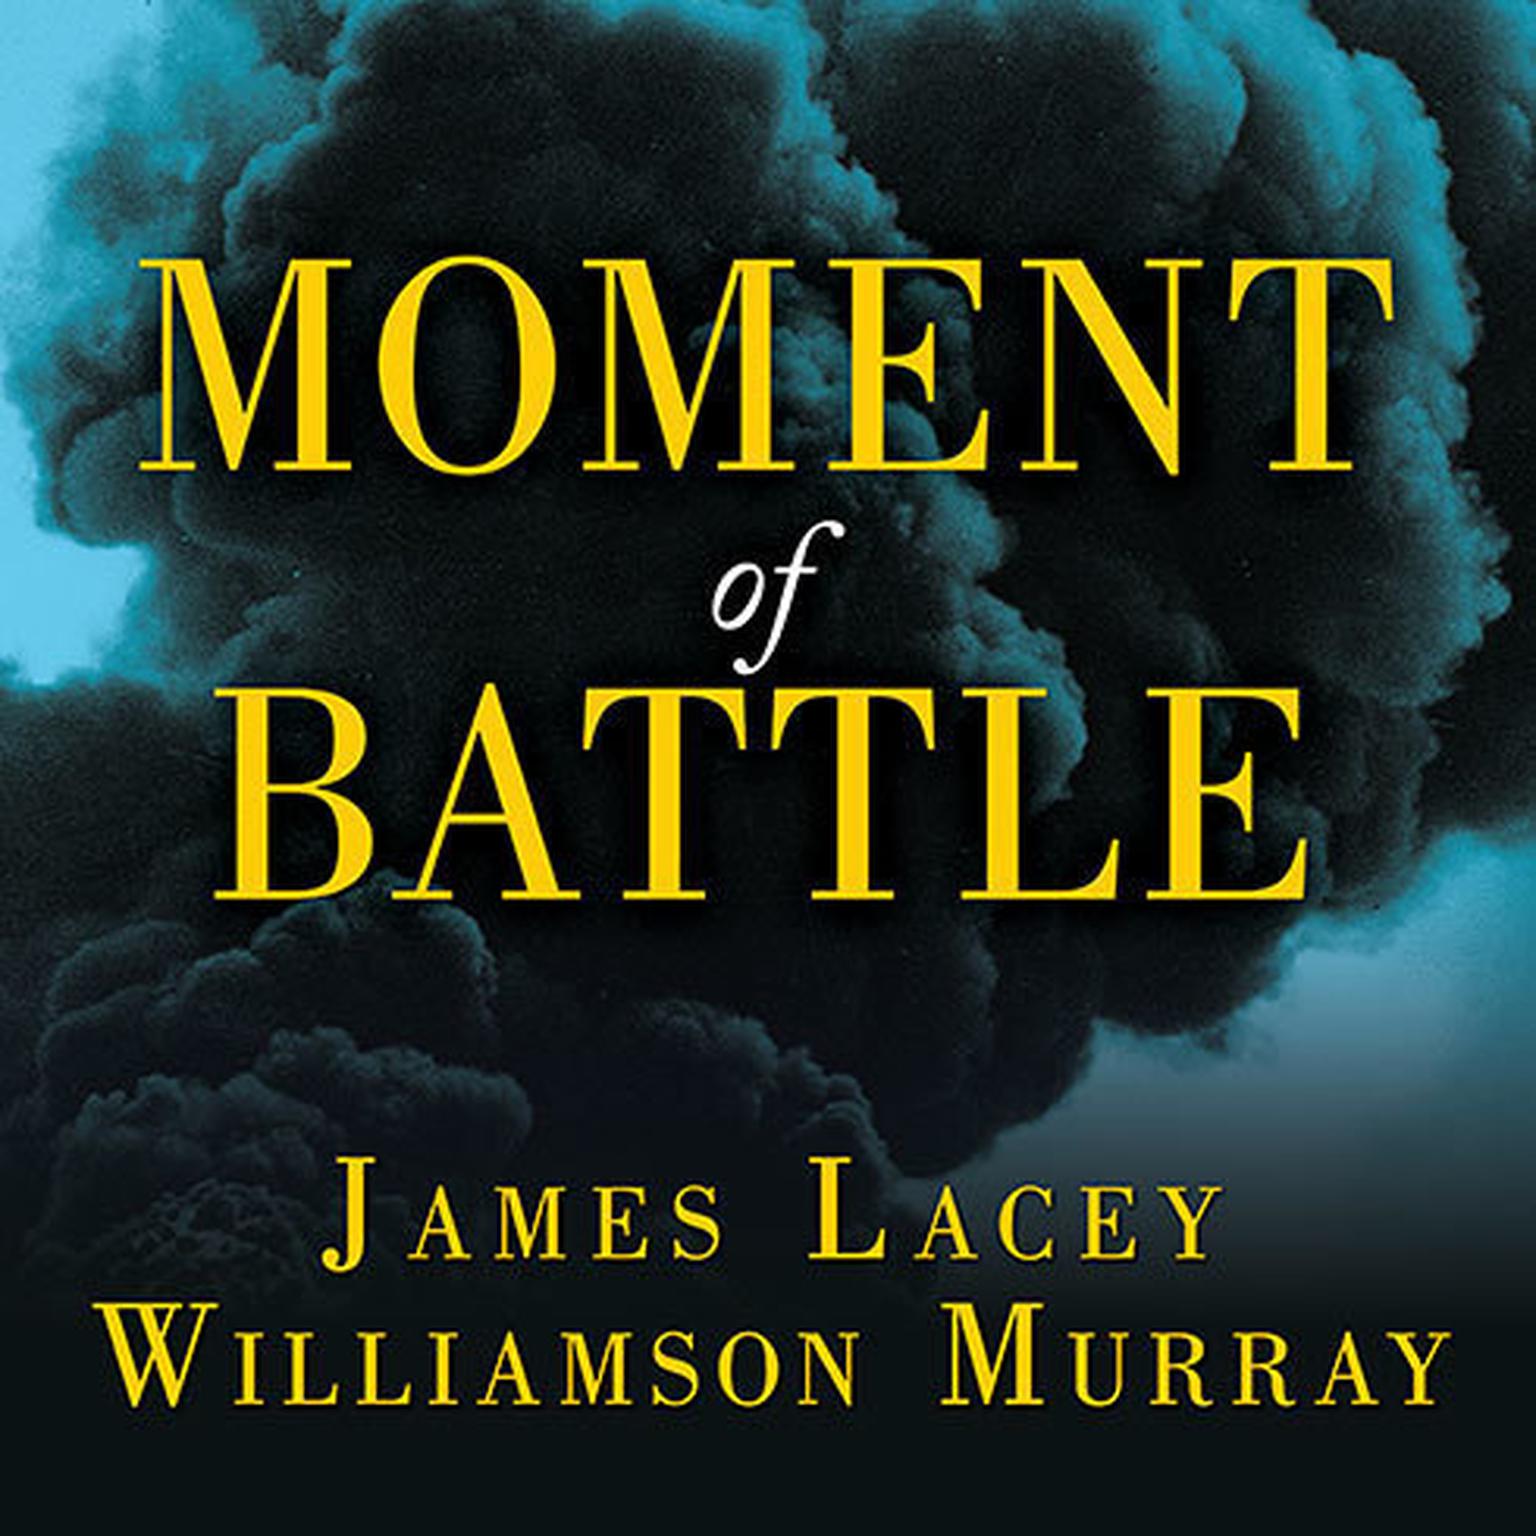 Moment of Battle: The Twenty Clashes That Changed the World Audiobook, by James Lacey